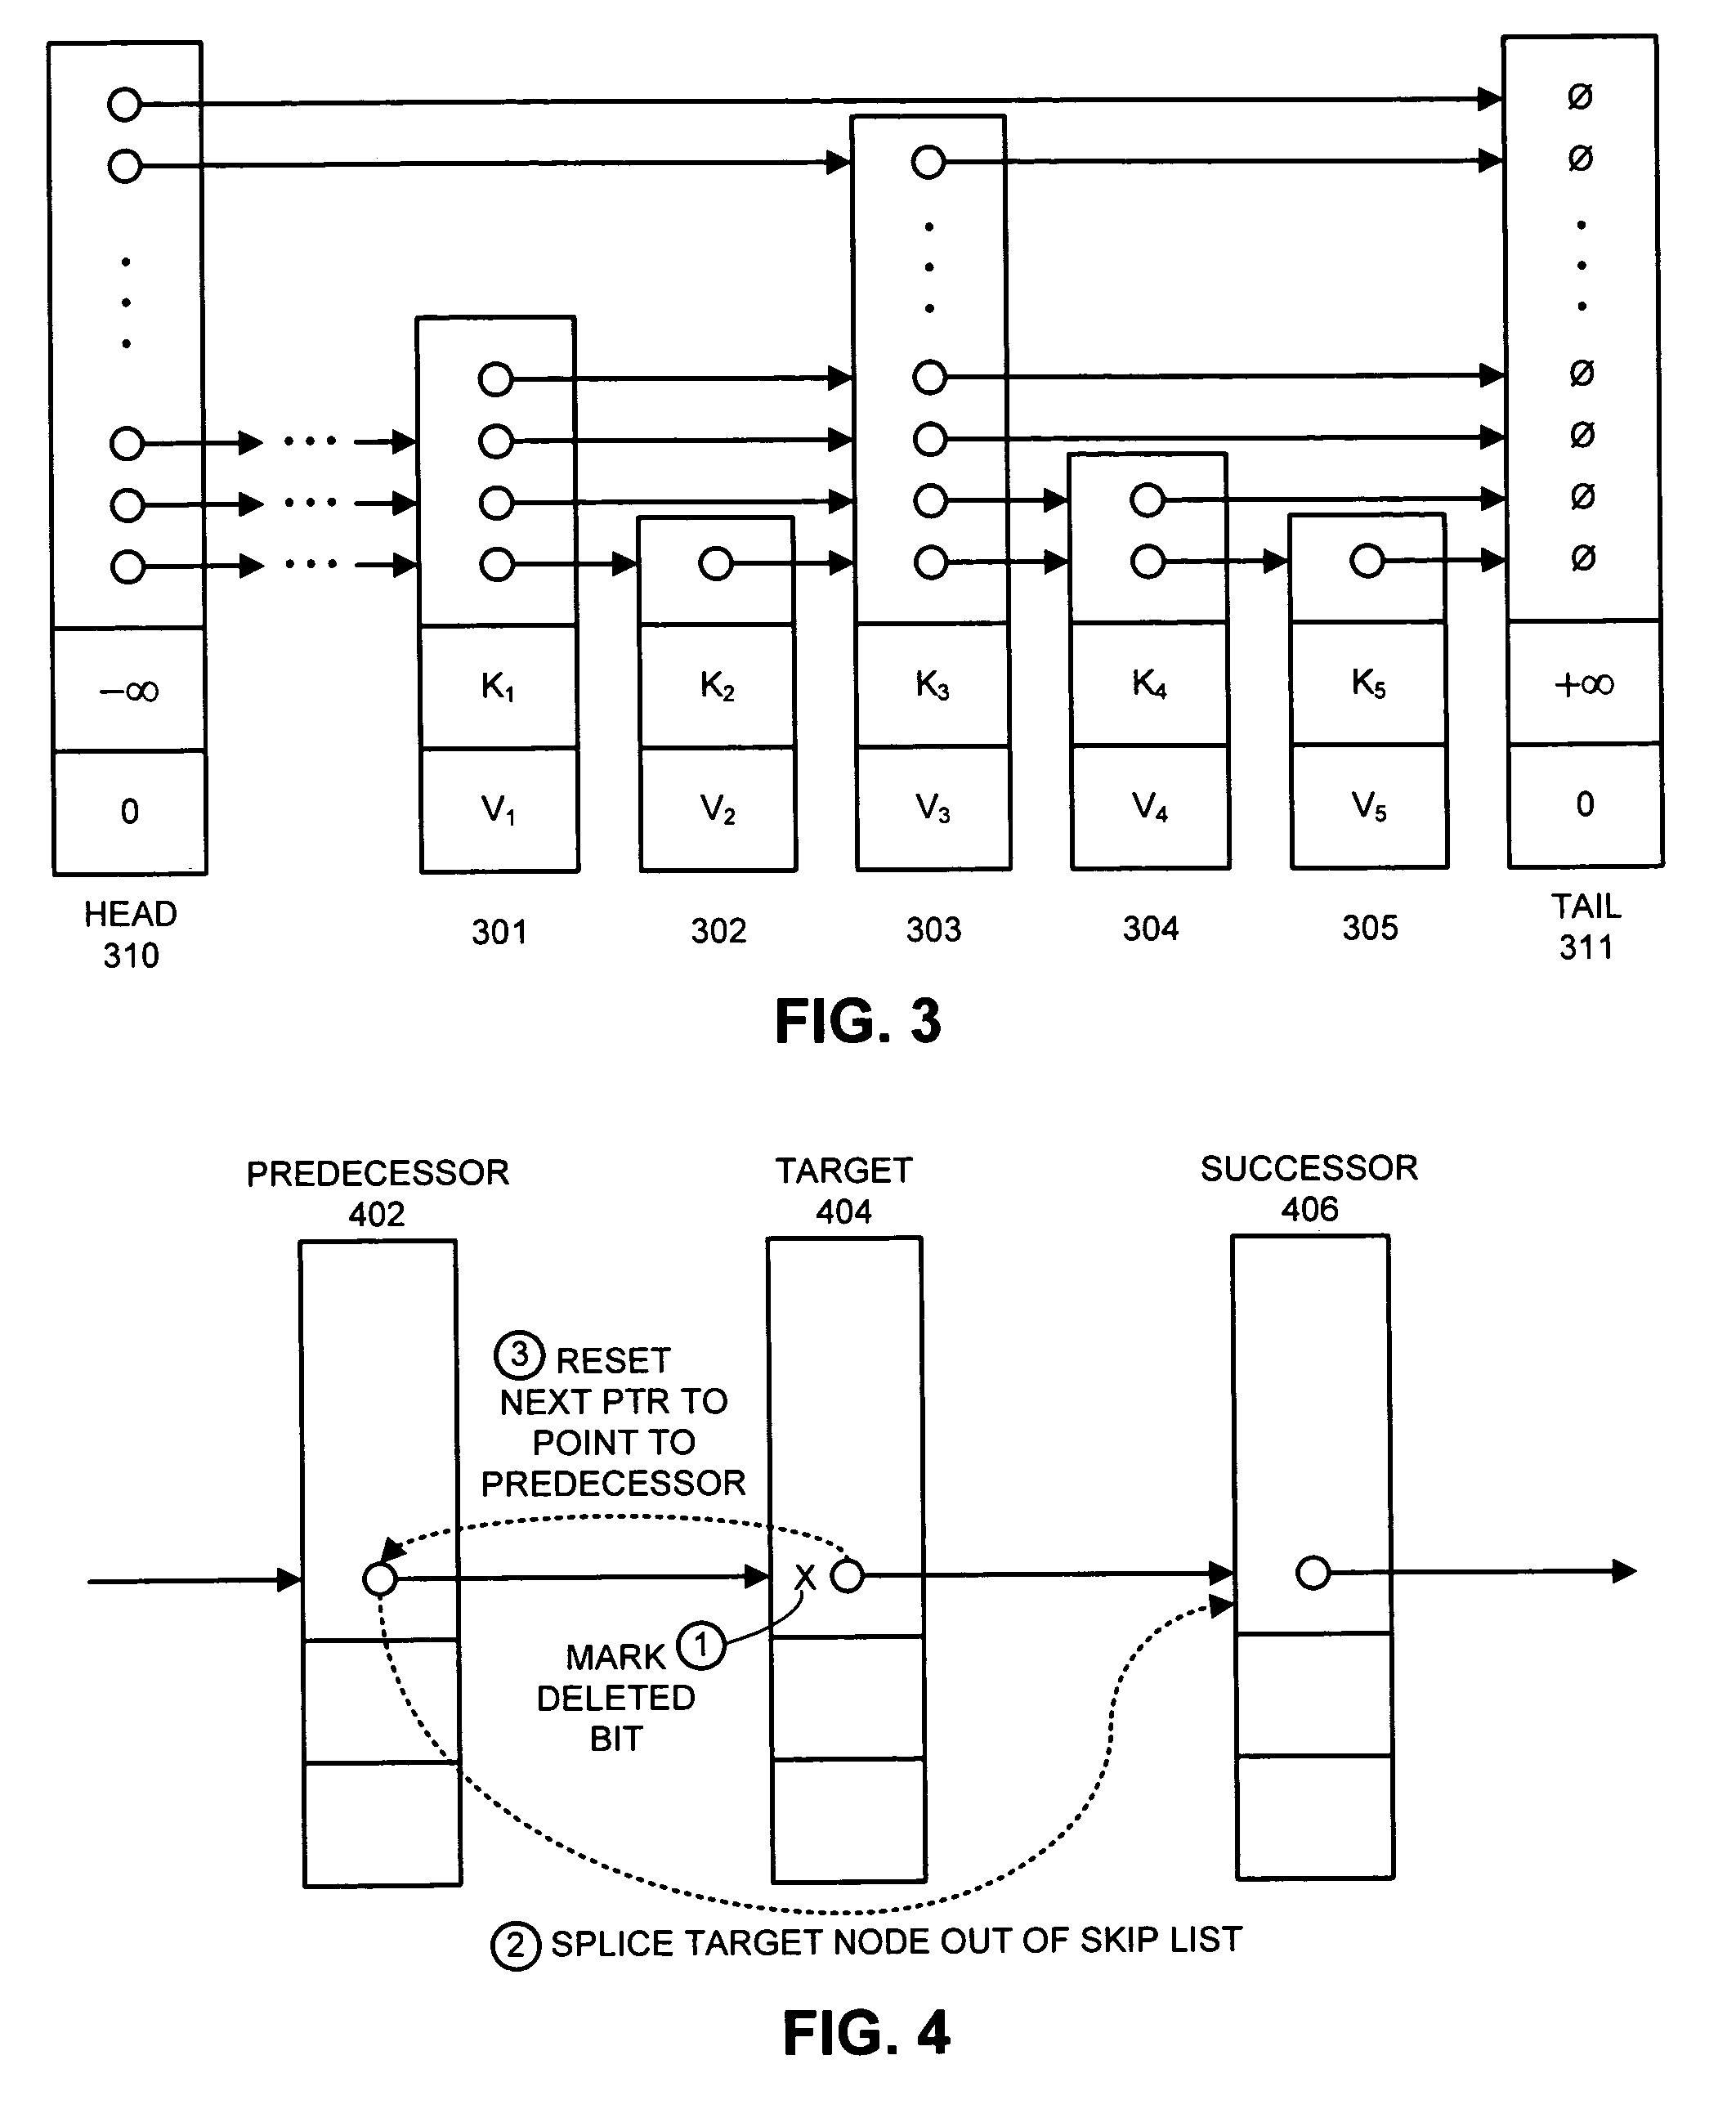 Method and apparatus for implementing a lock-free skip list that supports concurrent accesses